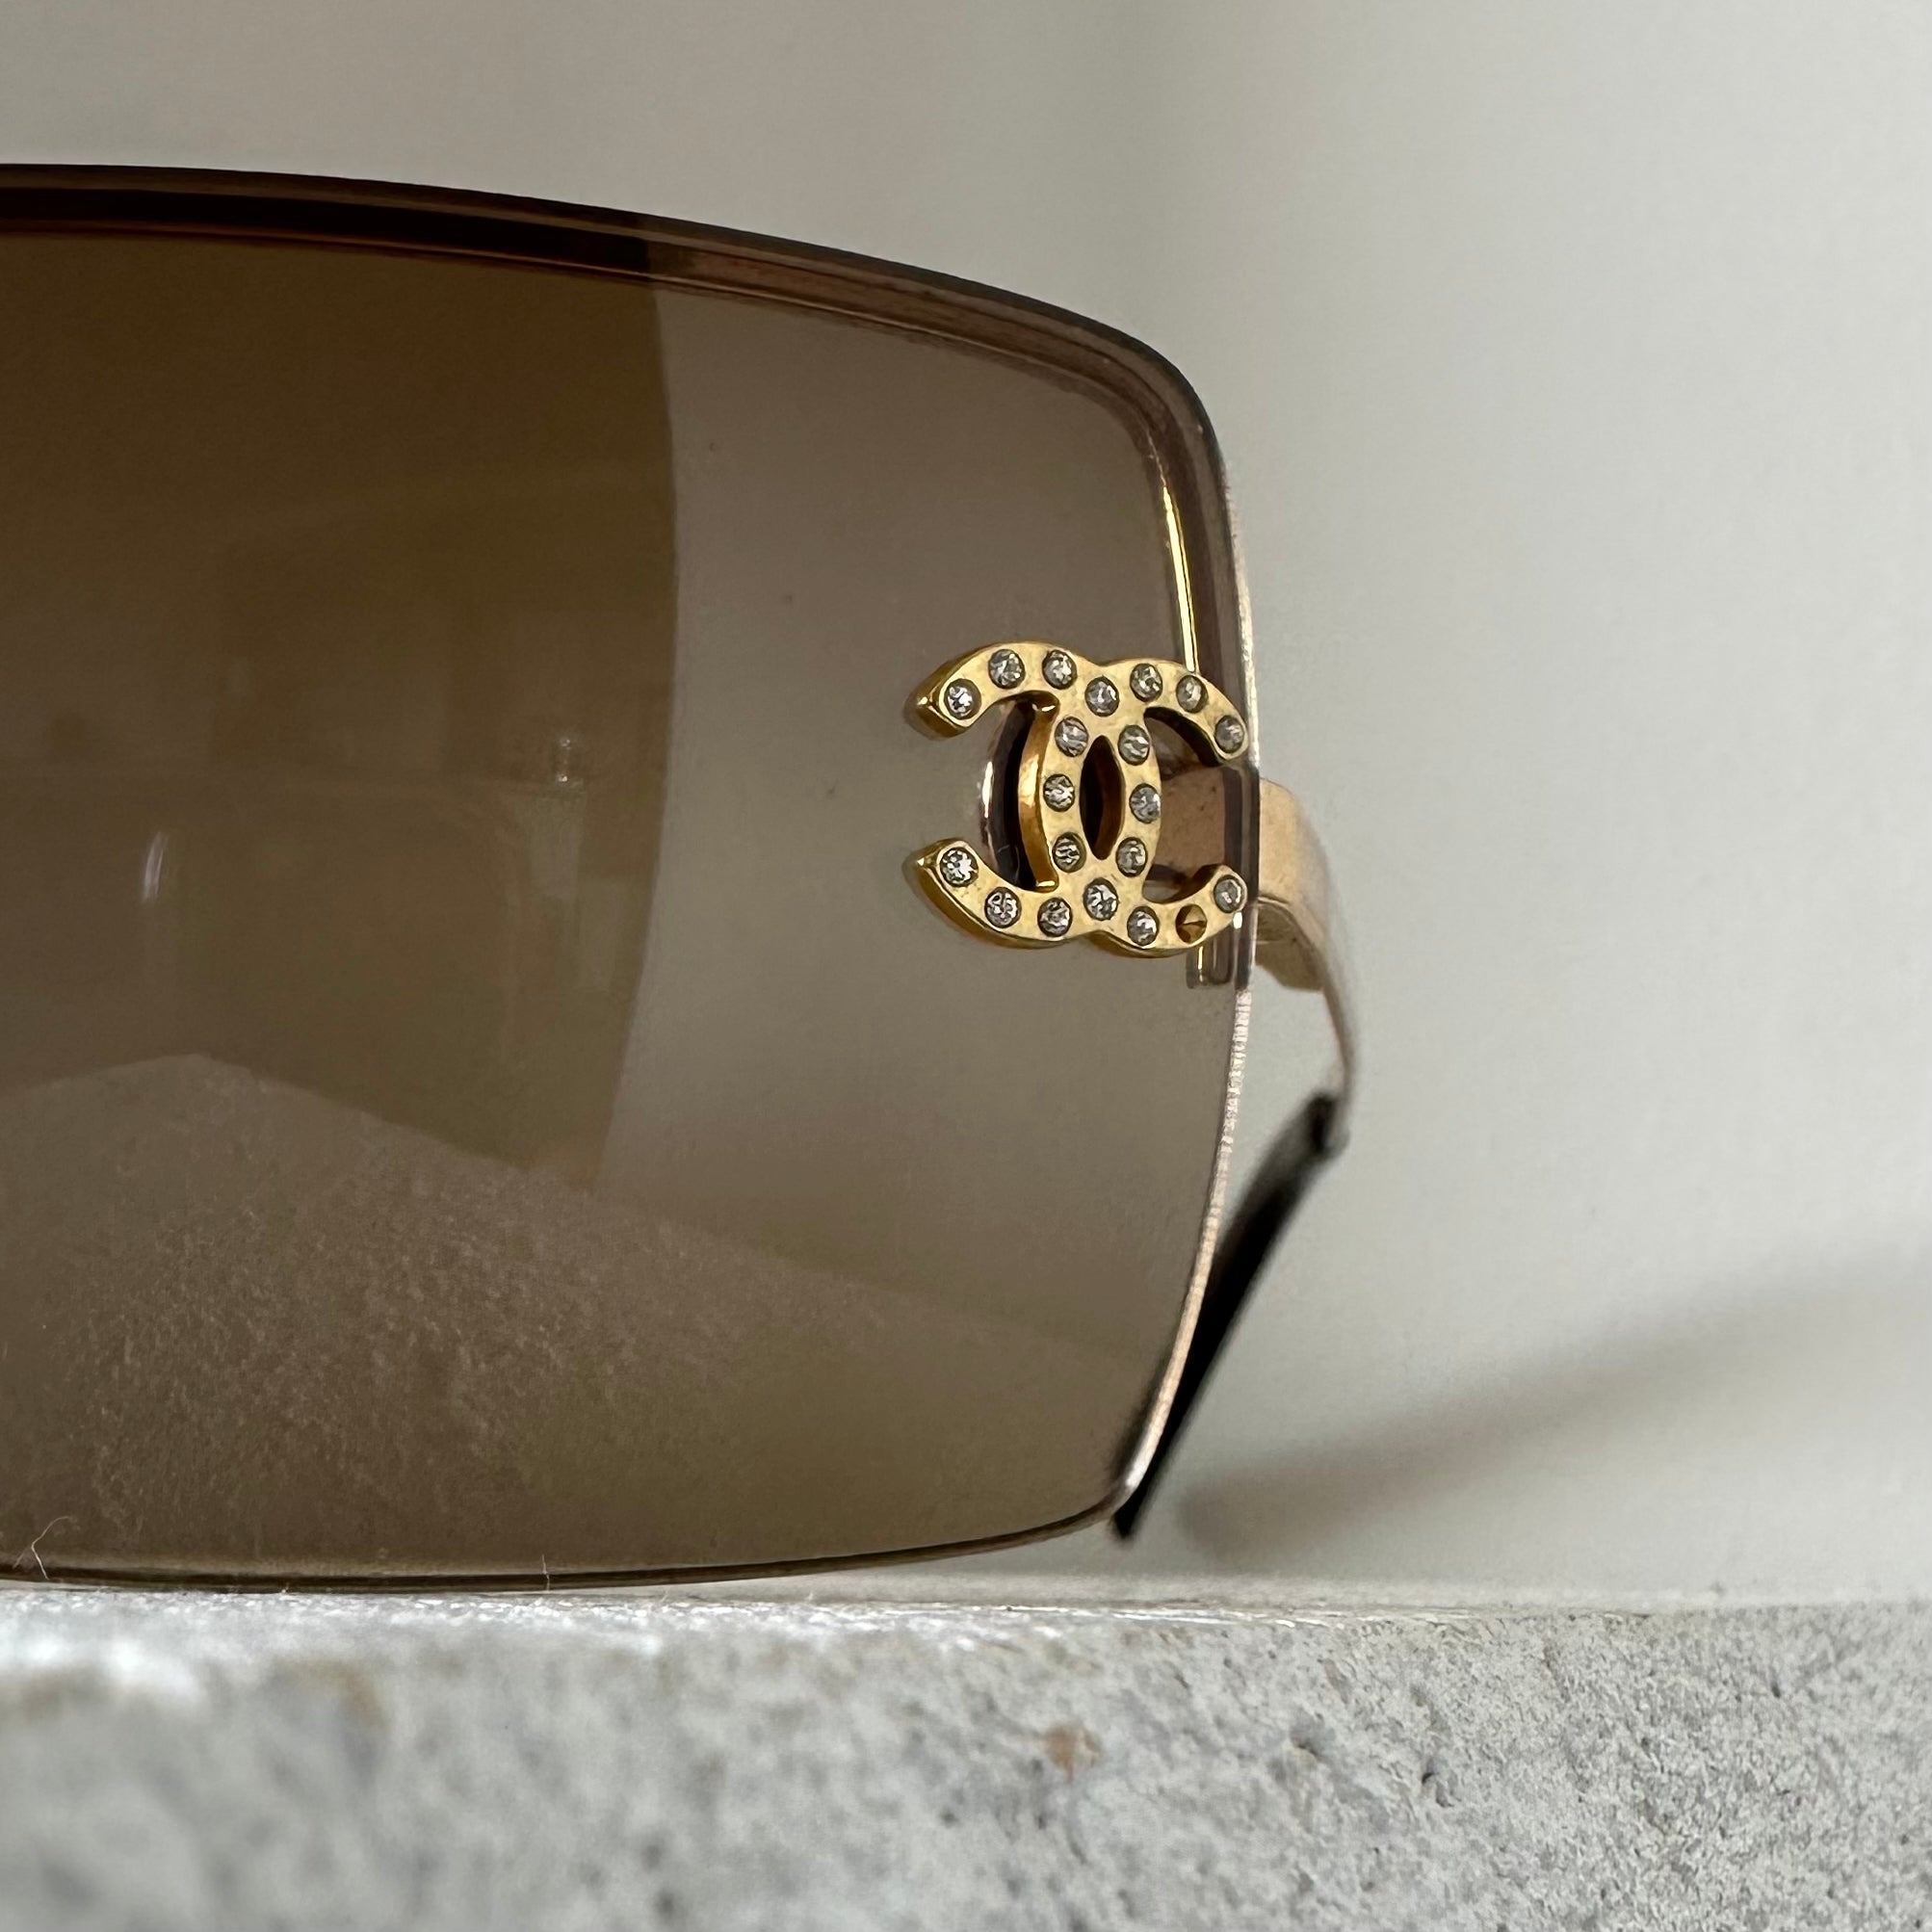 NTWRK - Chanel Brown and Gold Rimless Sunglasses